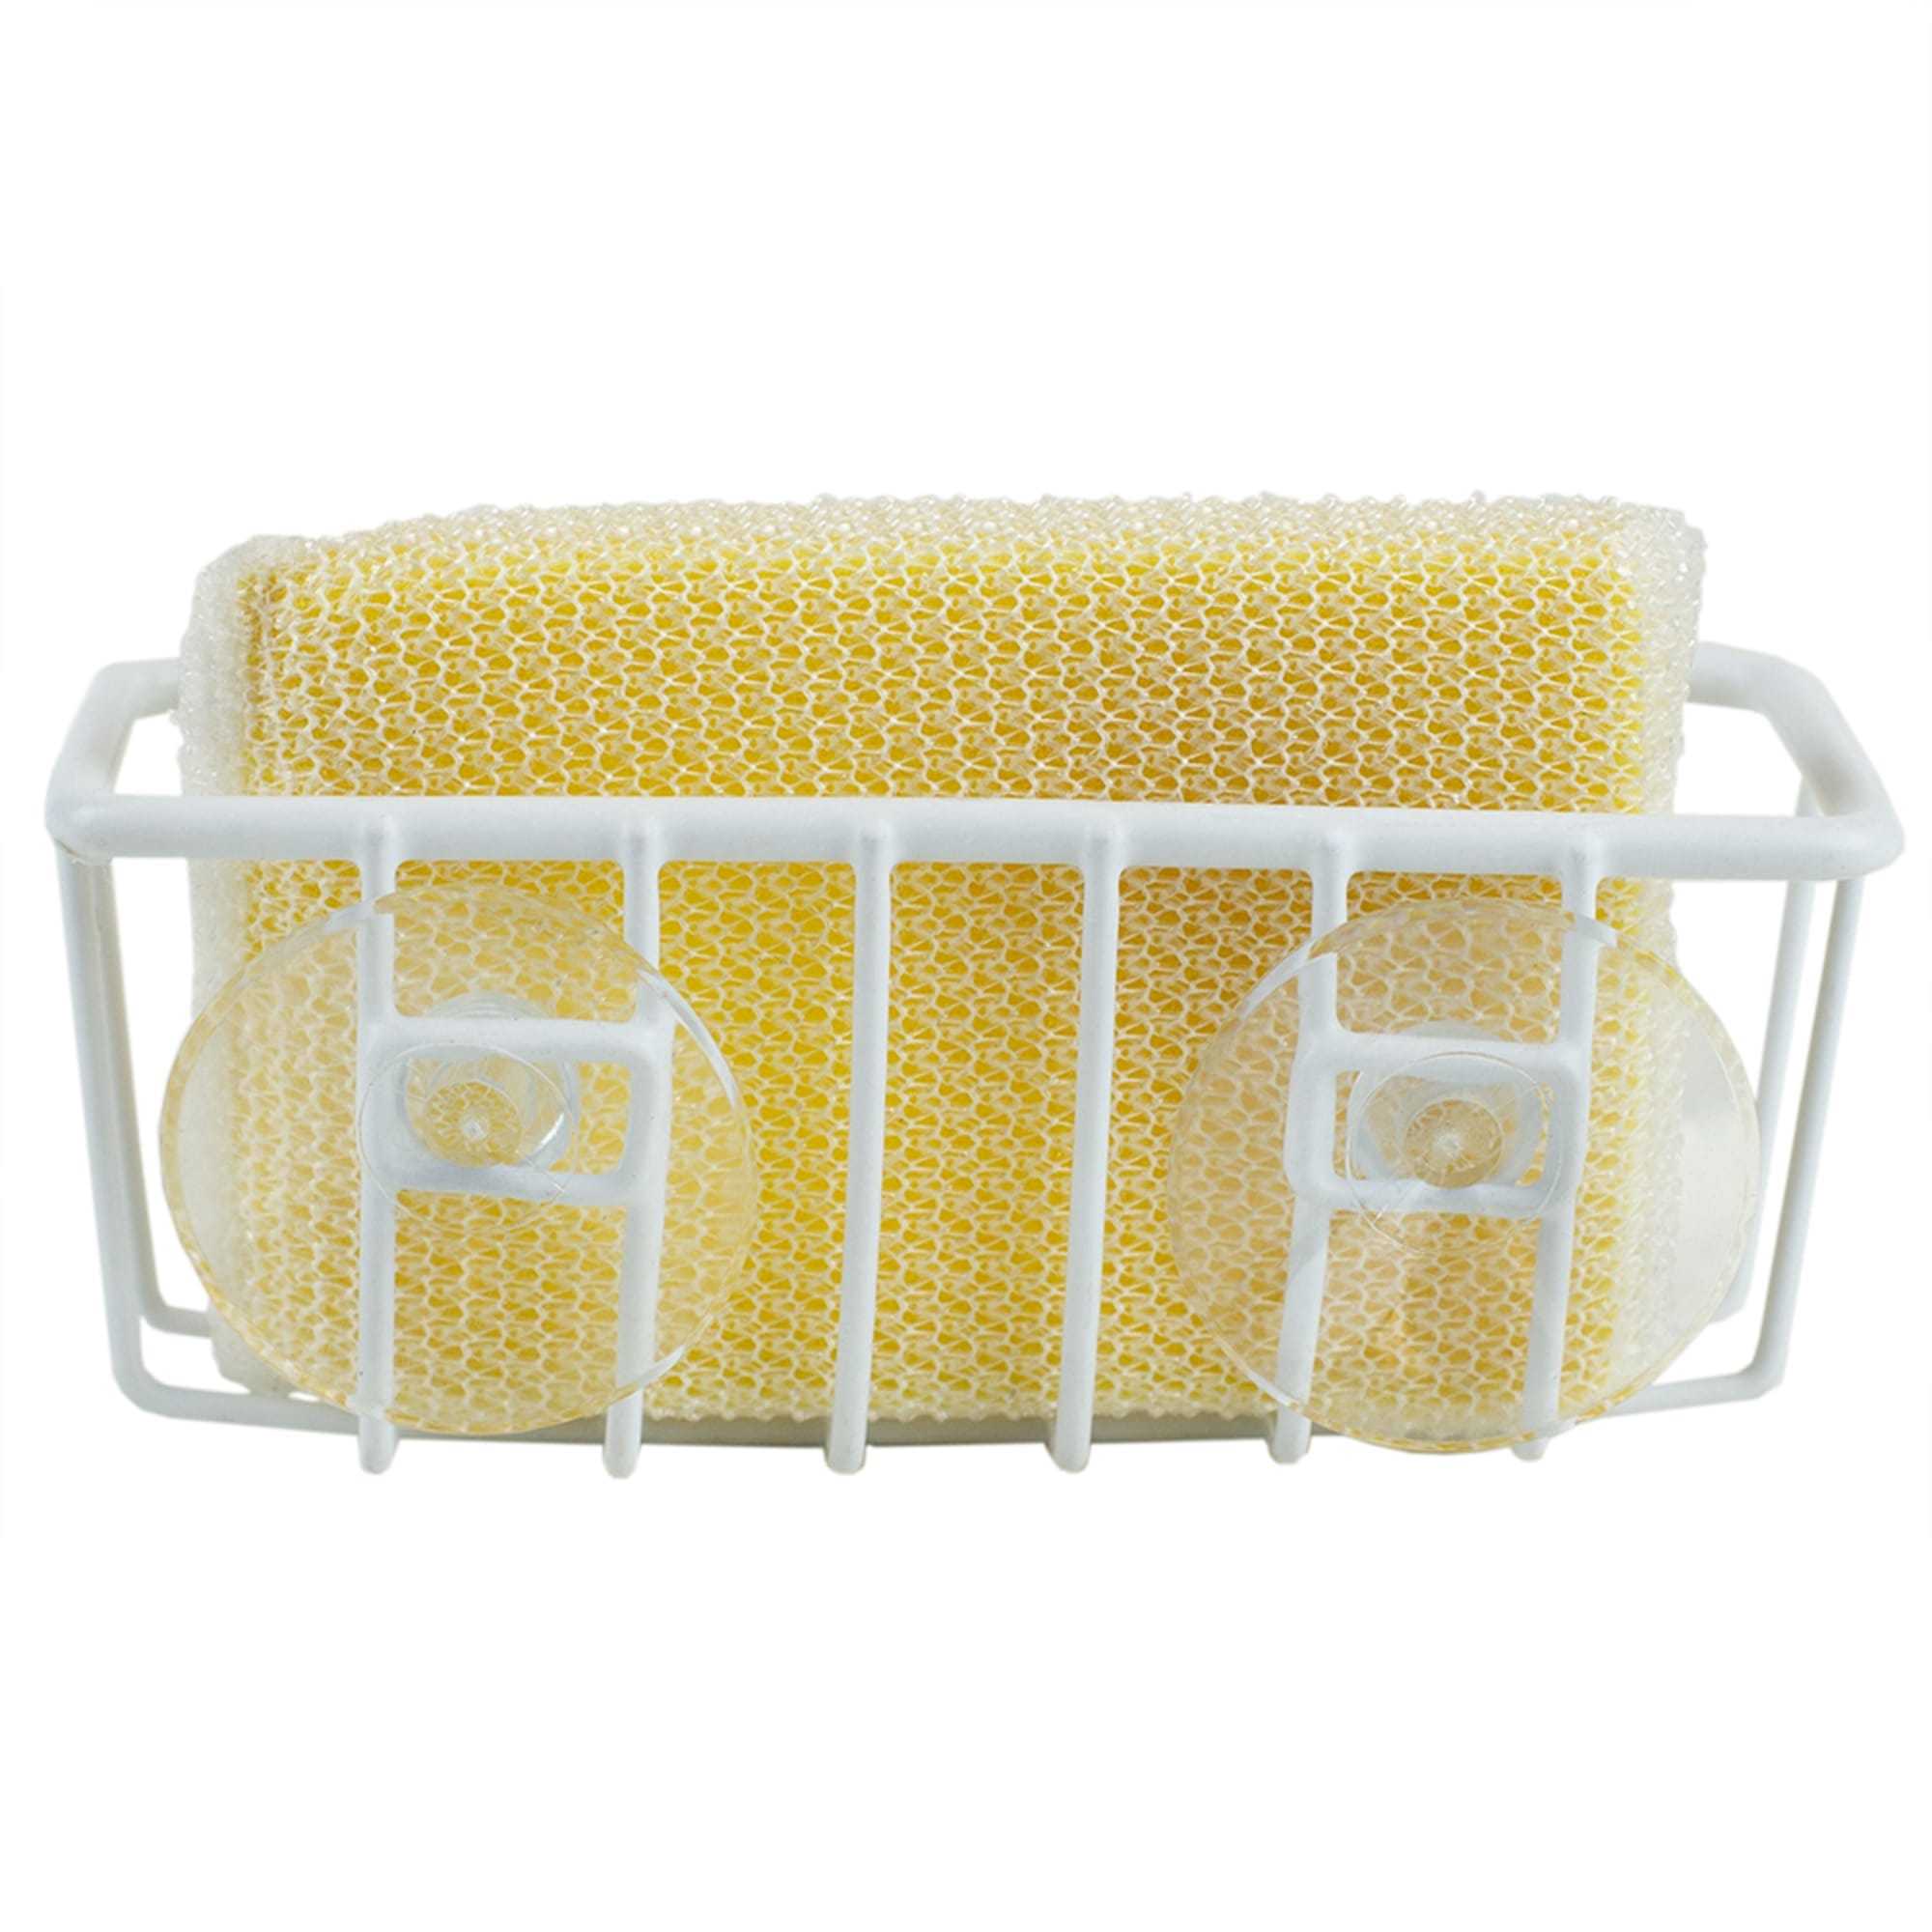 Home Basics Vinyl Coated Steel  Sponge Holder with Suction Cups, White $3.00 EACH, CASE PACK OF 24